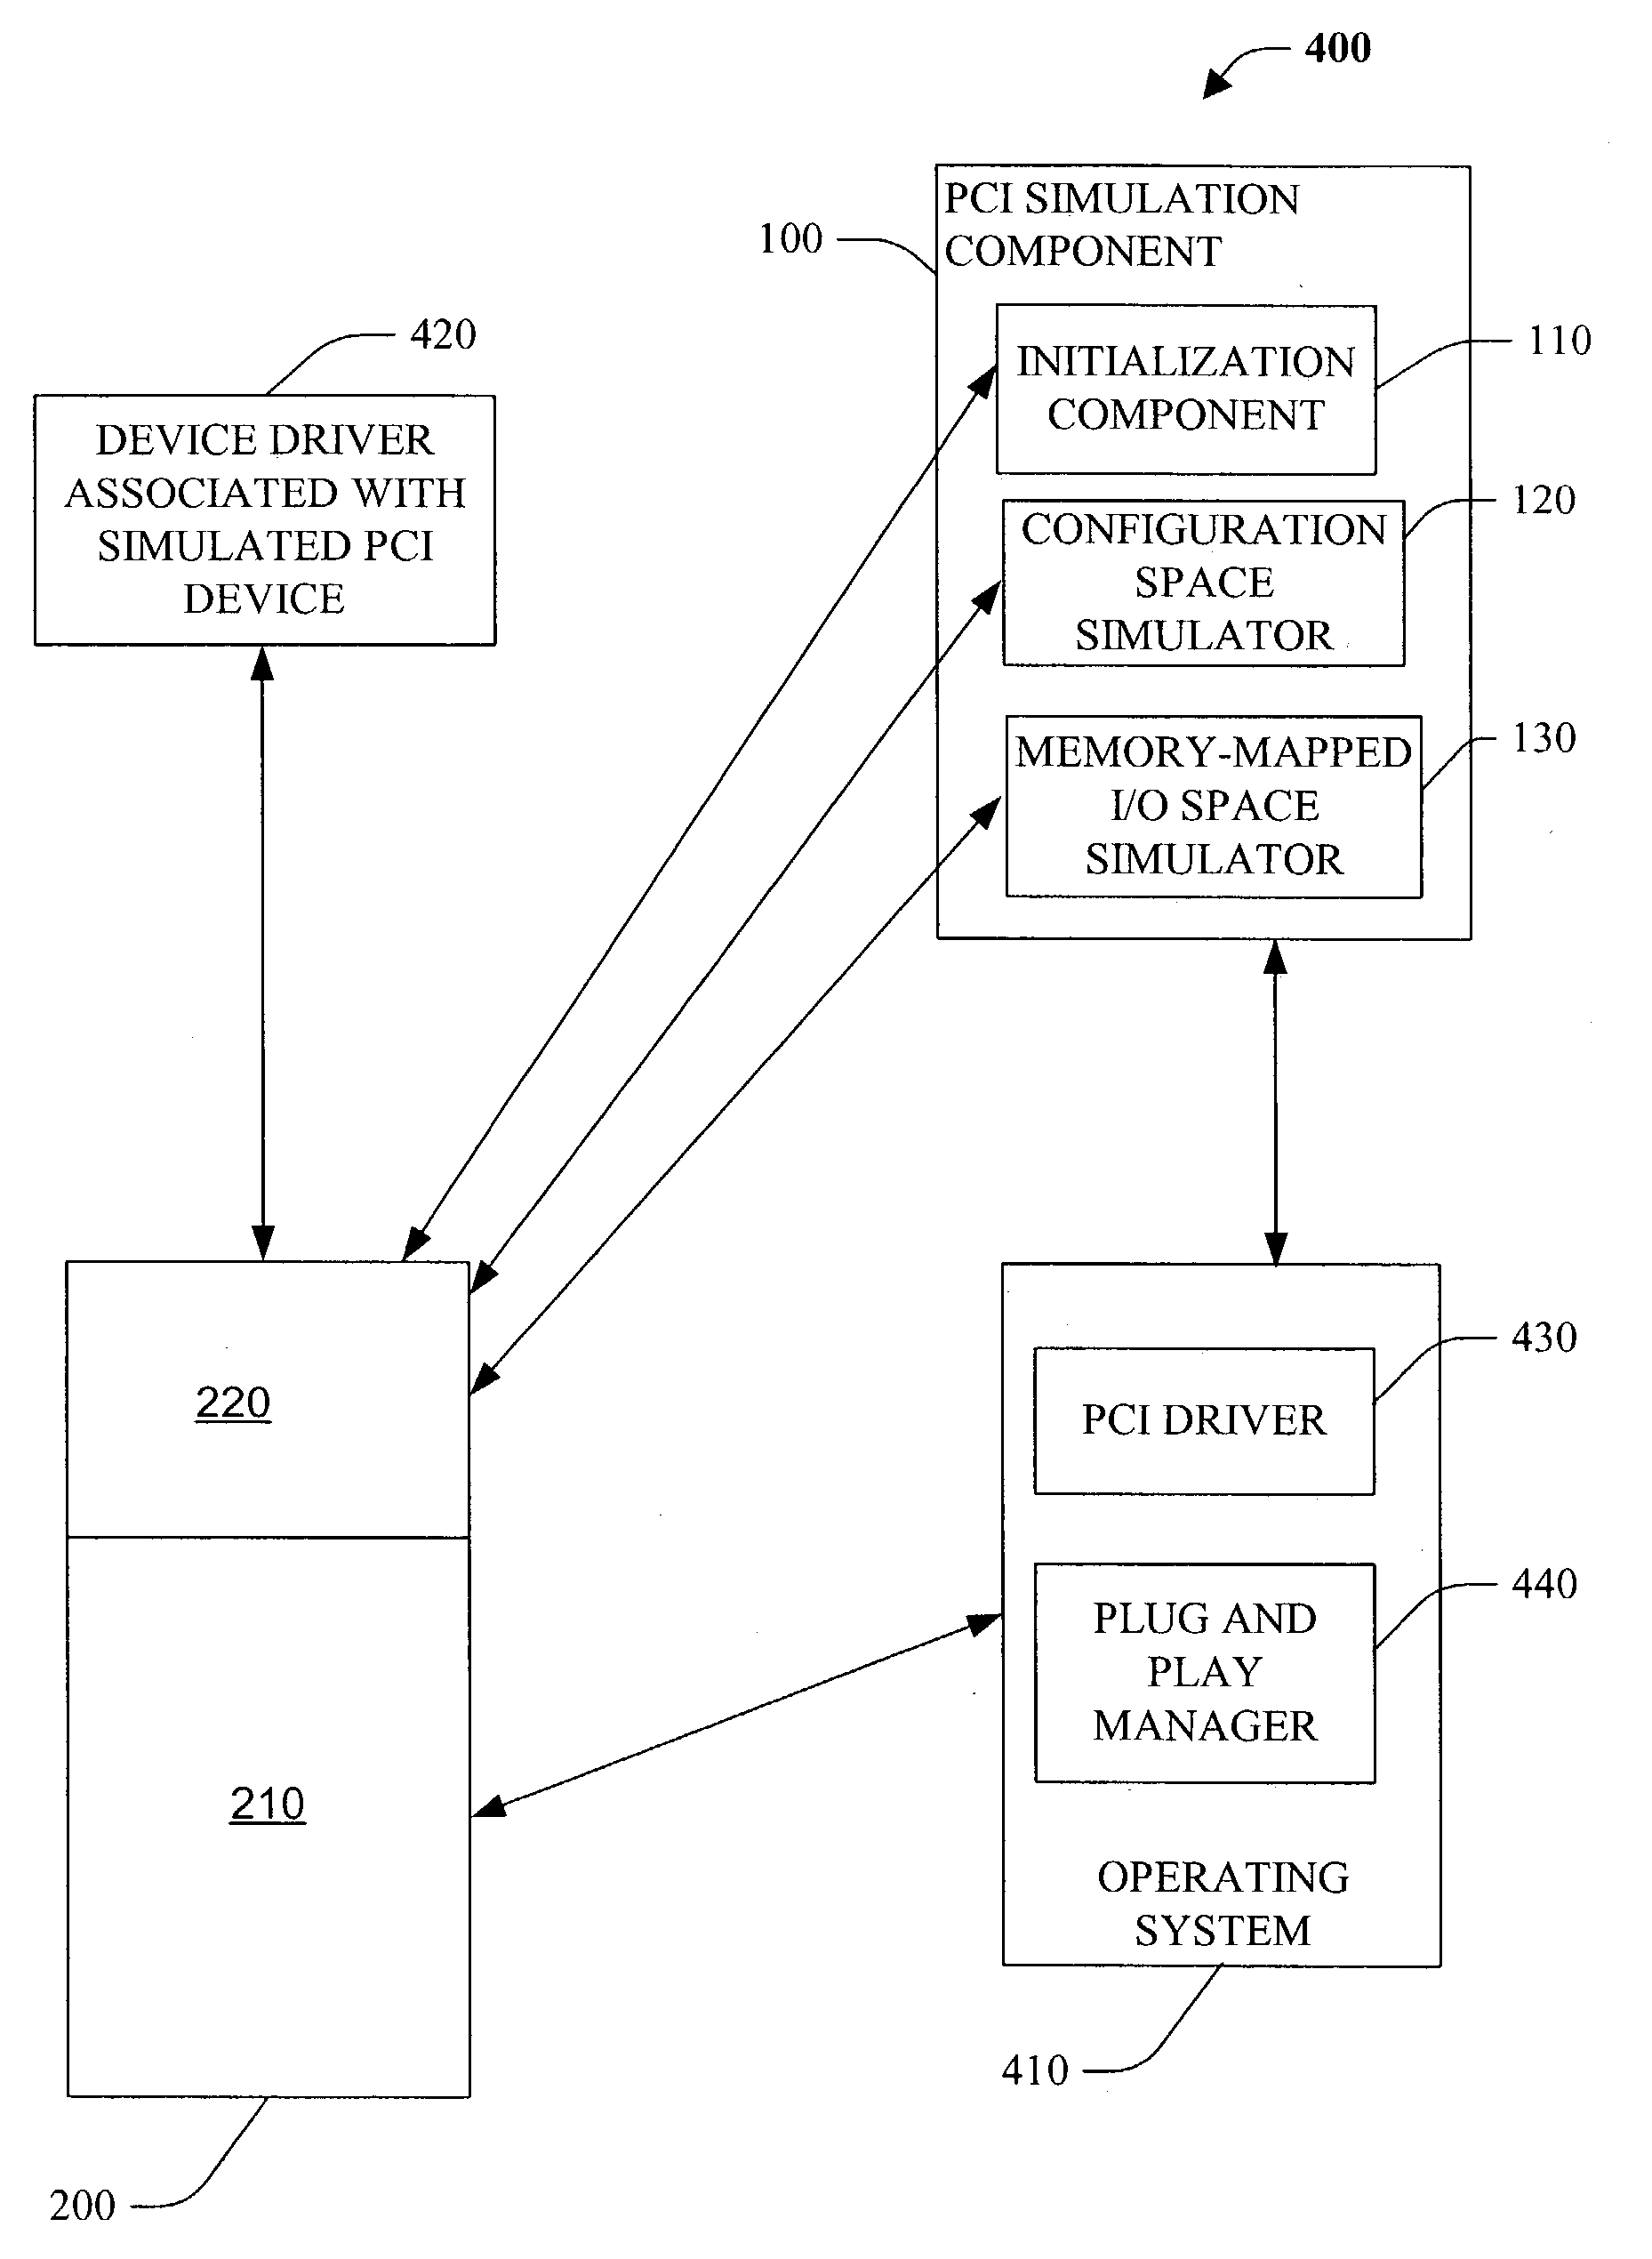 Simulation of a PCI device's memory-mapped I/O registers